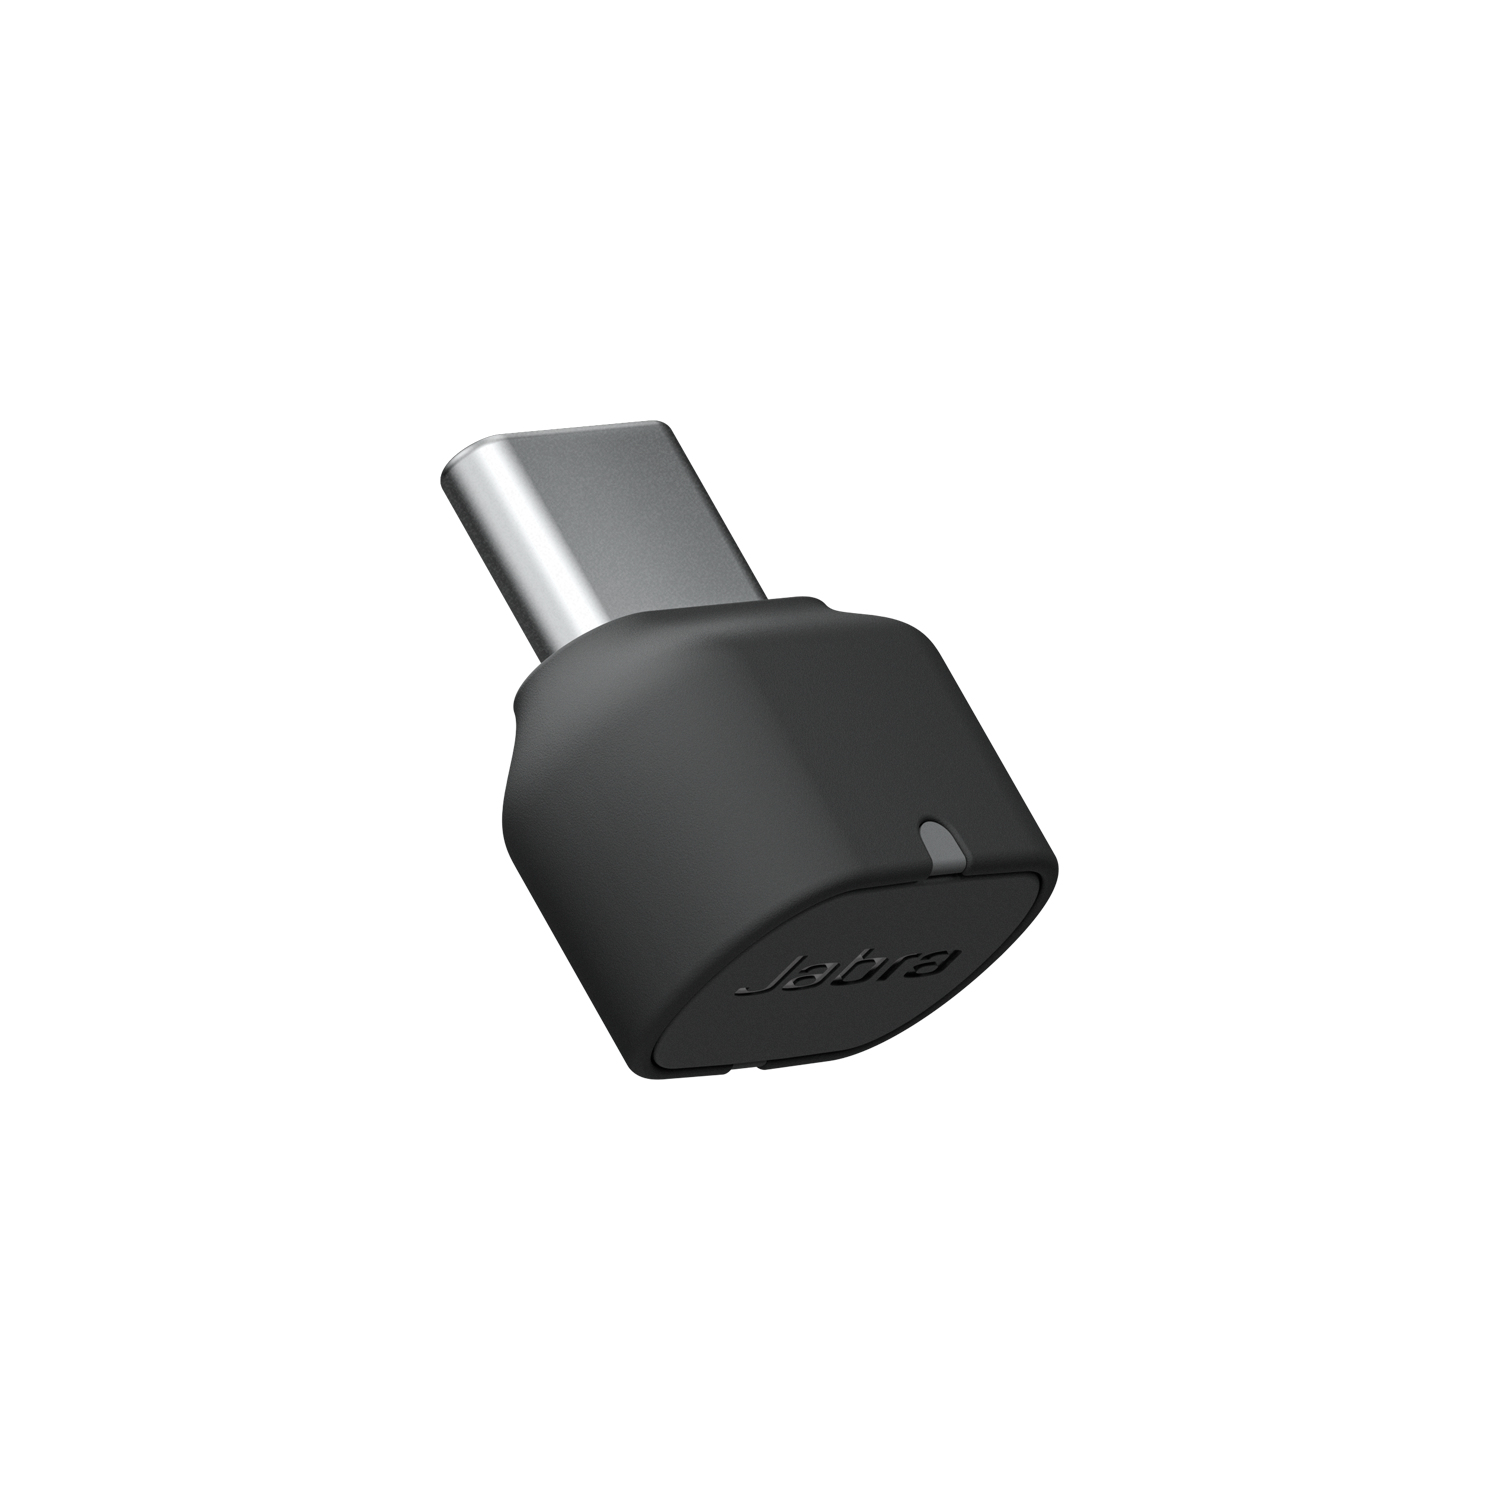 Jabra LINK 380c UC - For Unified Communications